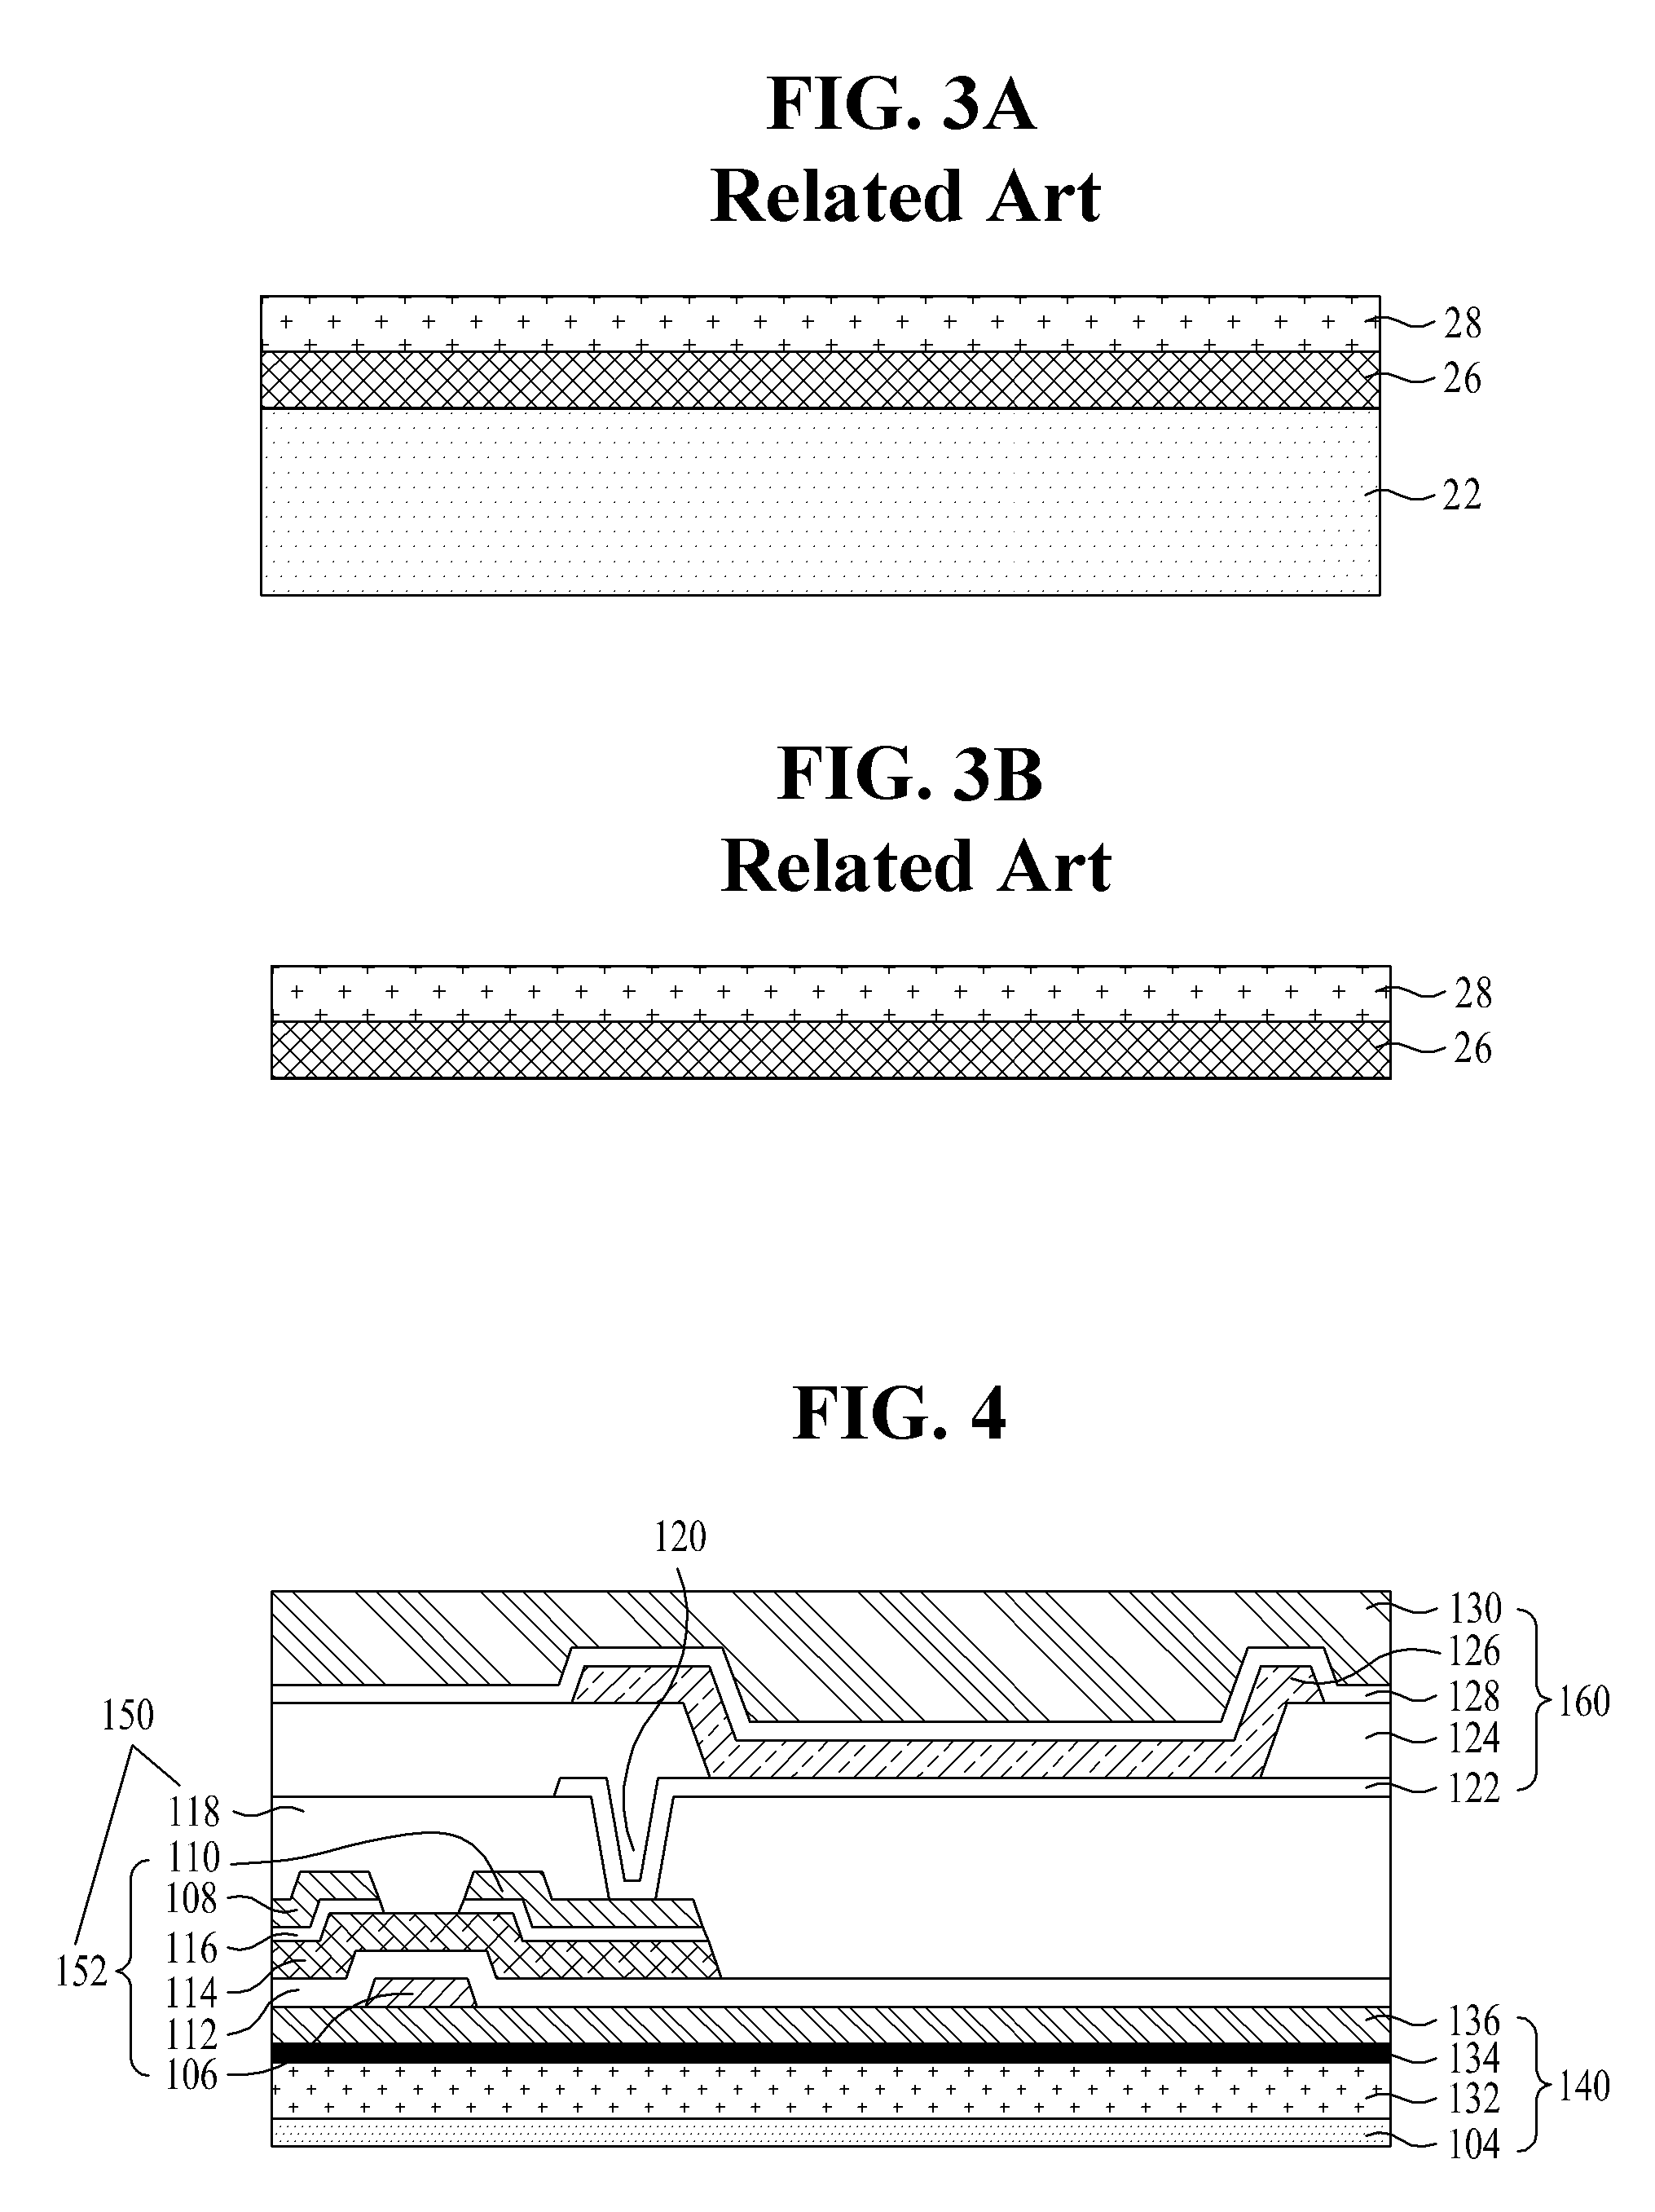 Flexible substrate and method for fabricating flexible display devicve having the same